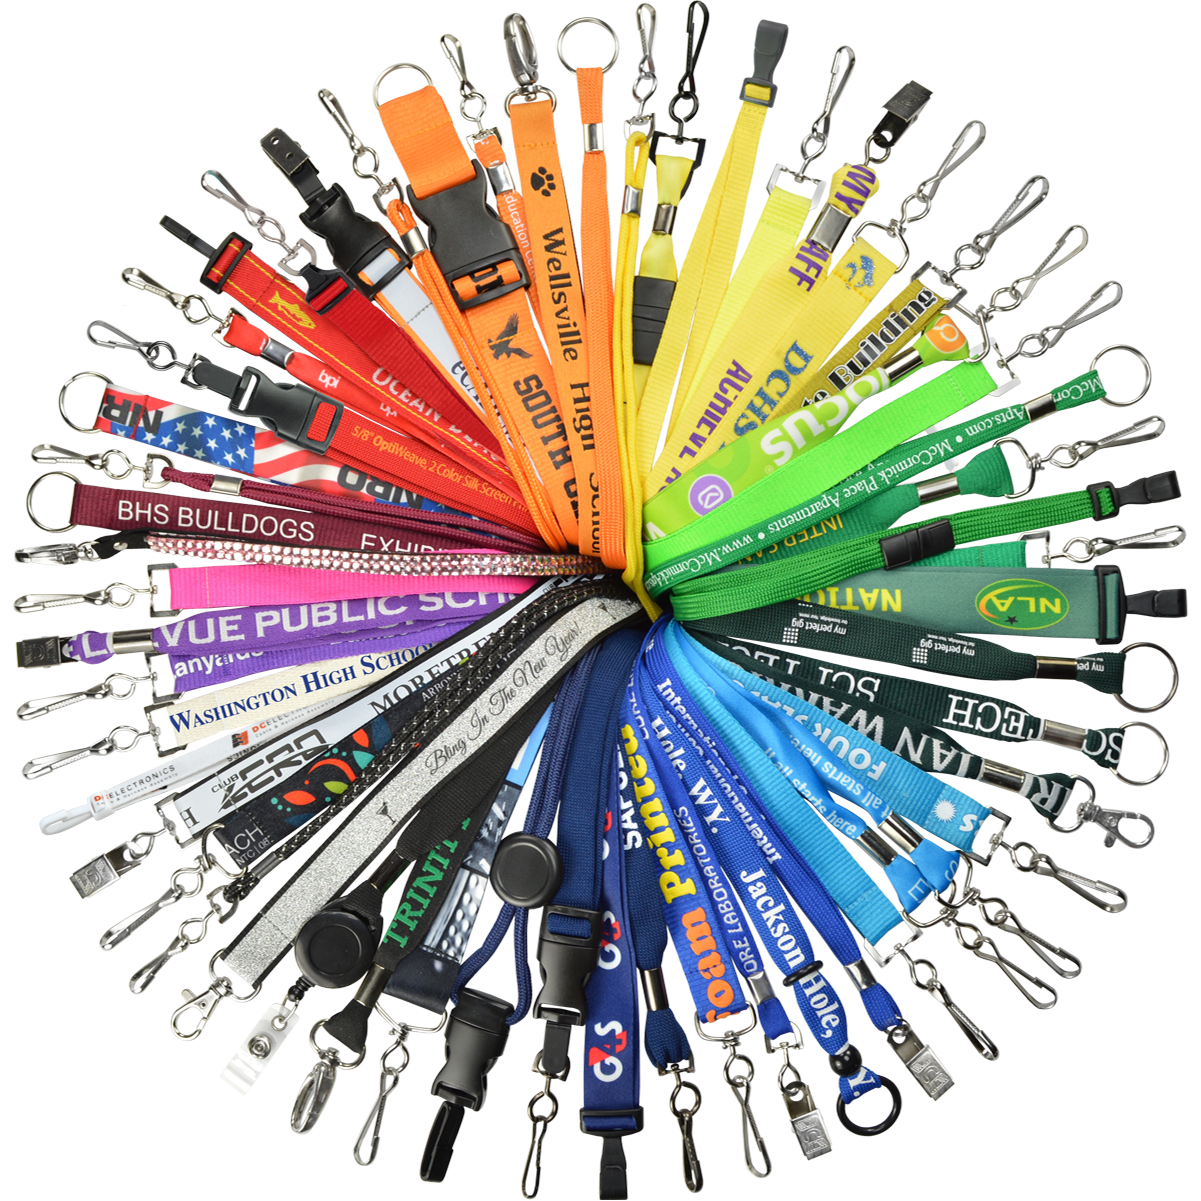 Custom Printed Lanyards Online Designer - Personalized Lanyards for Company, Conference, and VIP Events